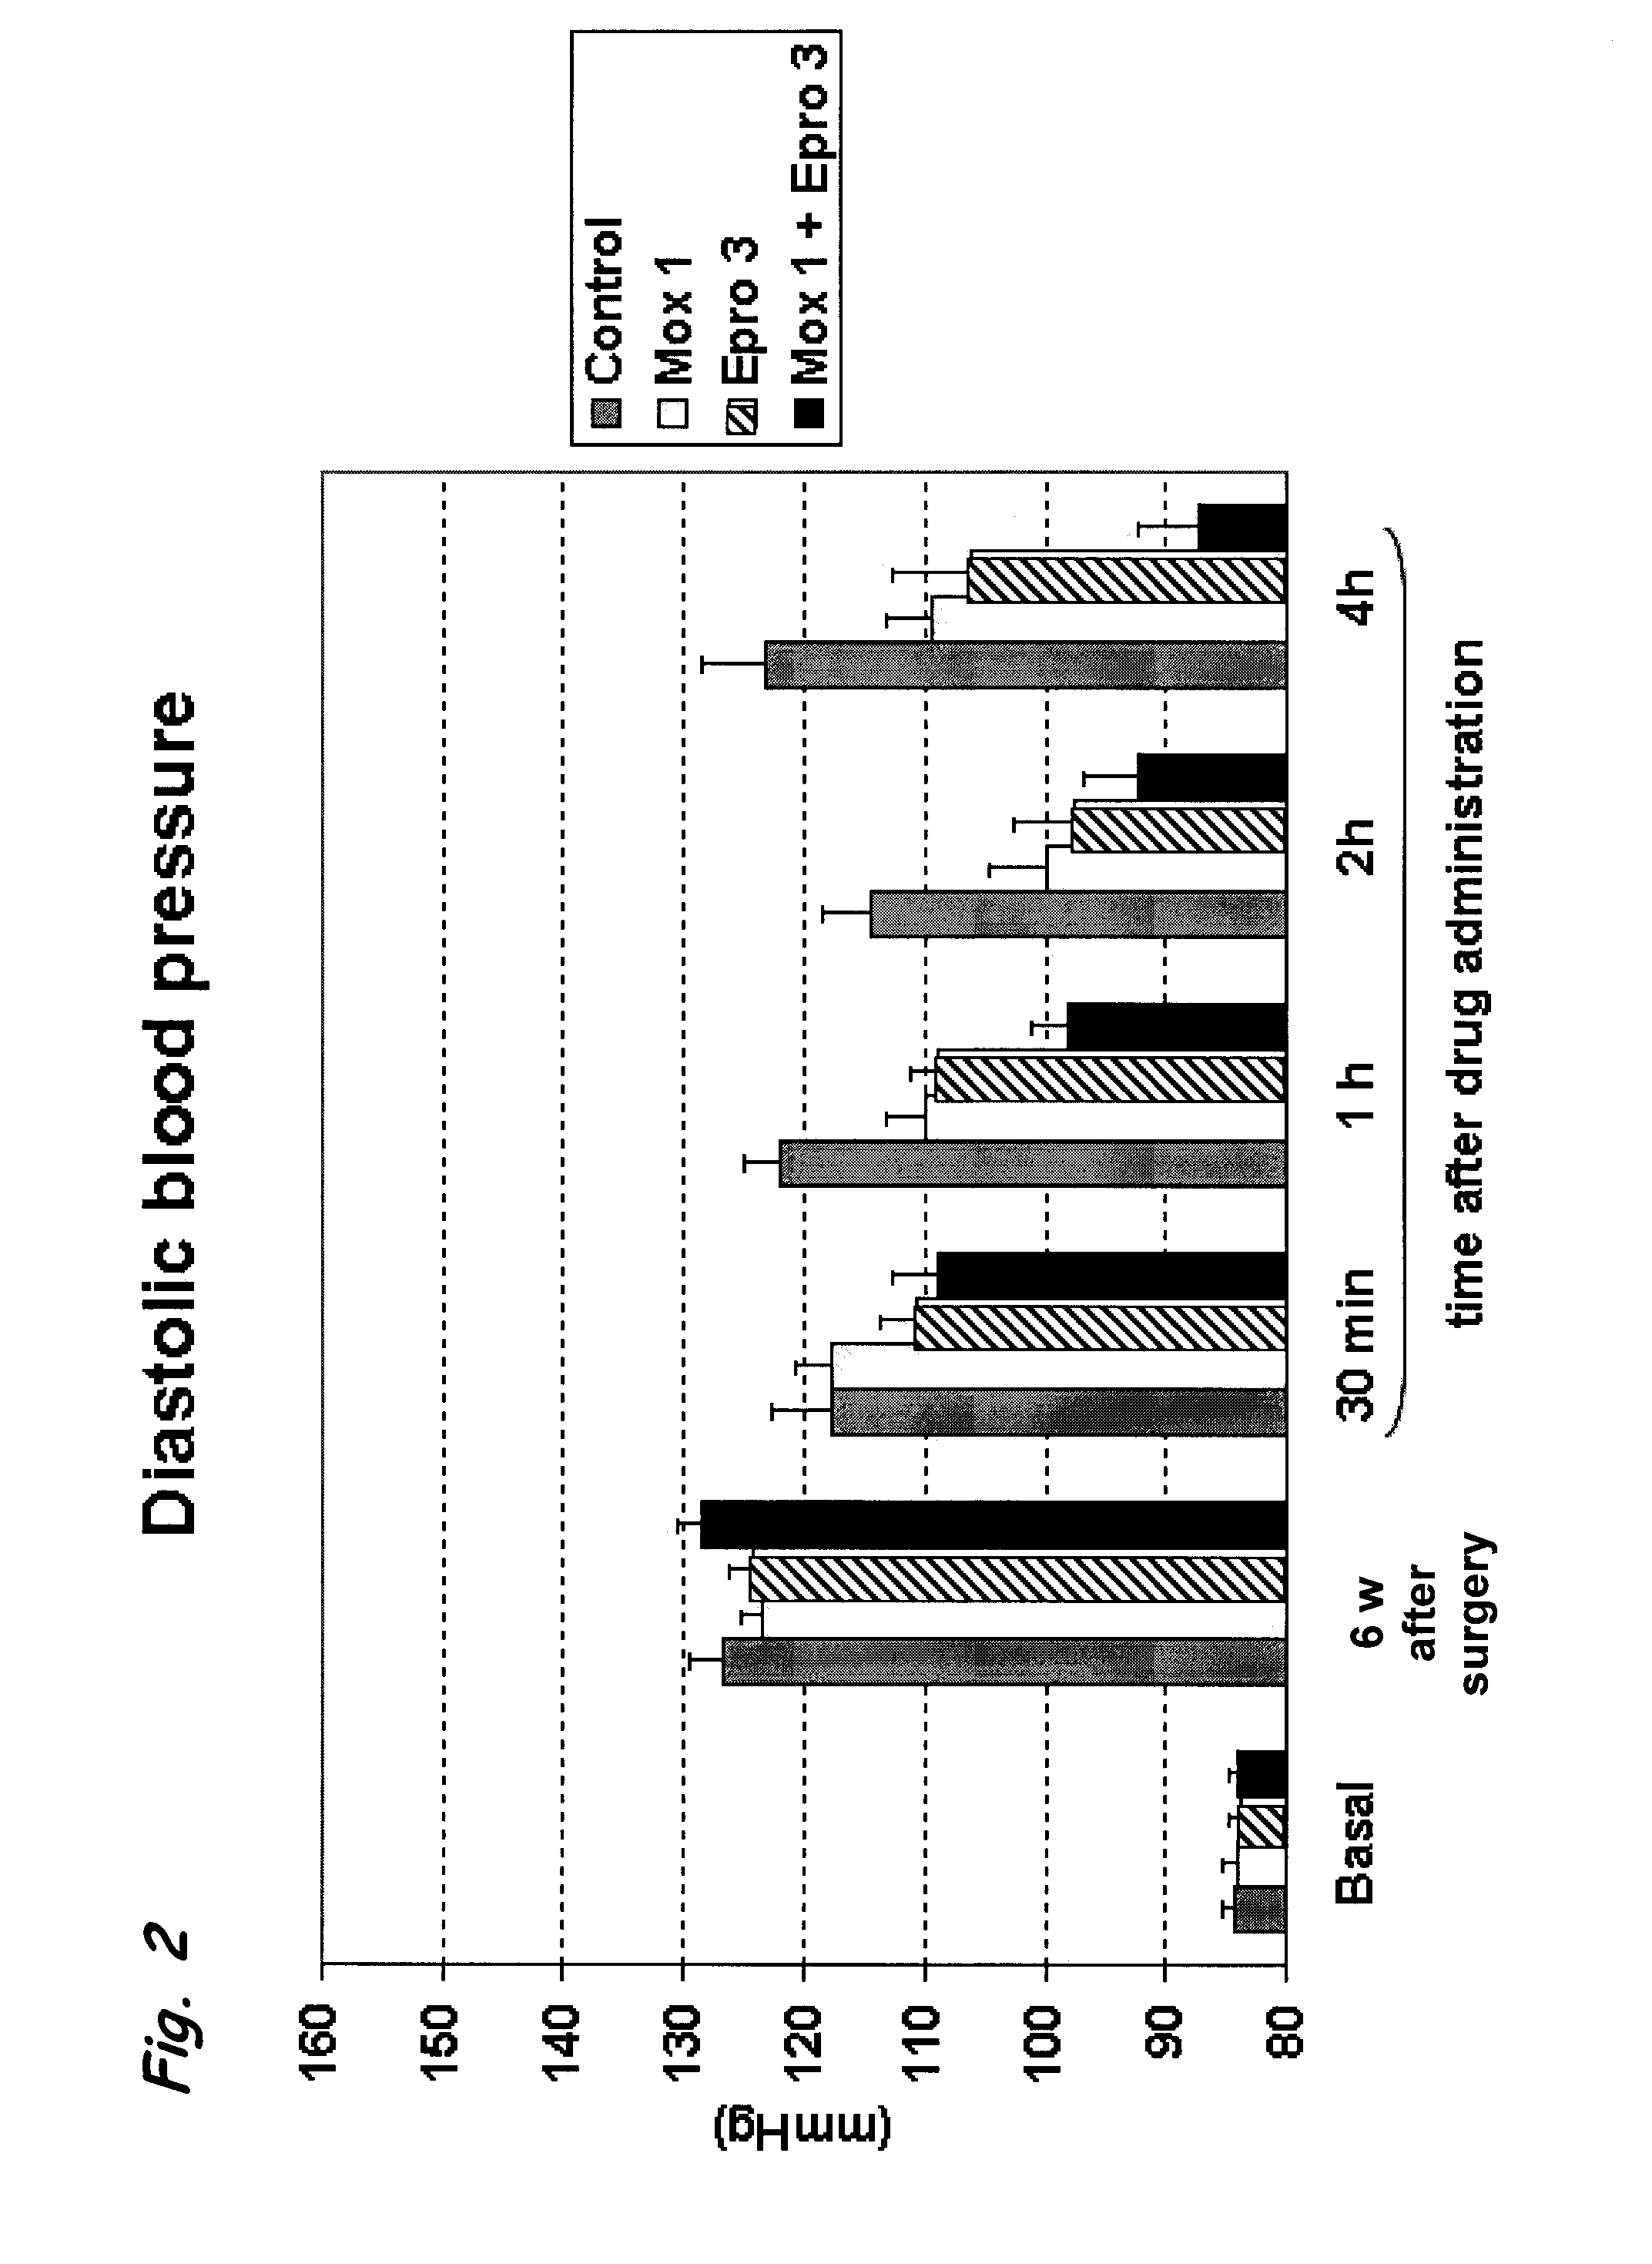 Pharmaceutical Compositions Comprising a Selective I1 Imidazoline Receptor Agonist and an Angiotensin II Receptor Blocker